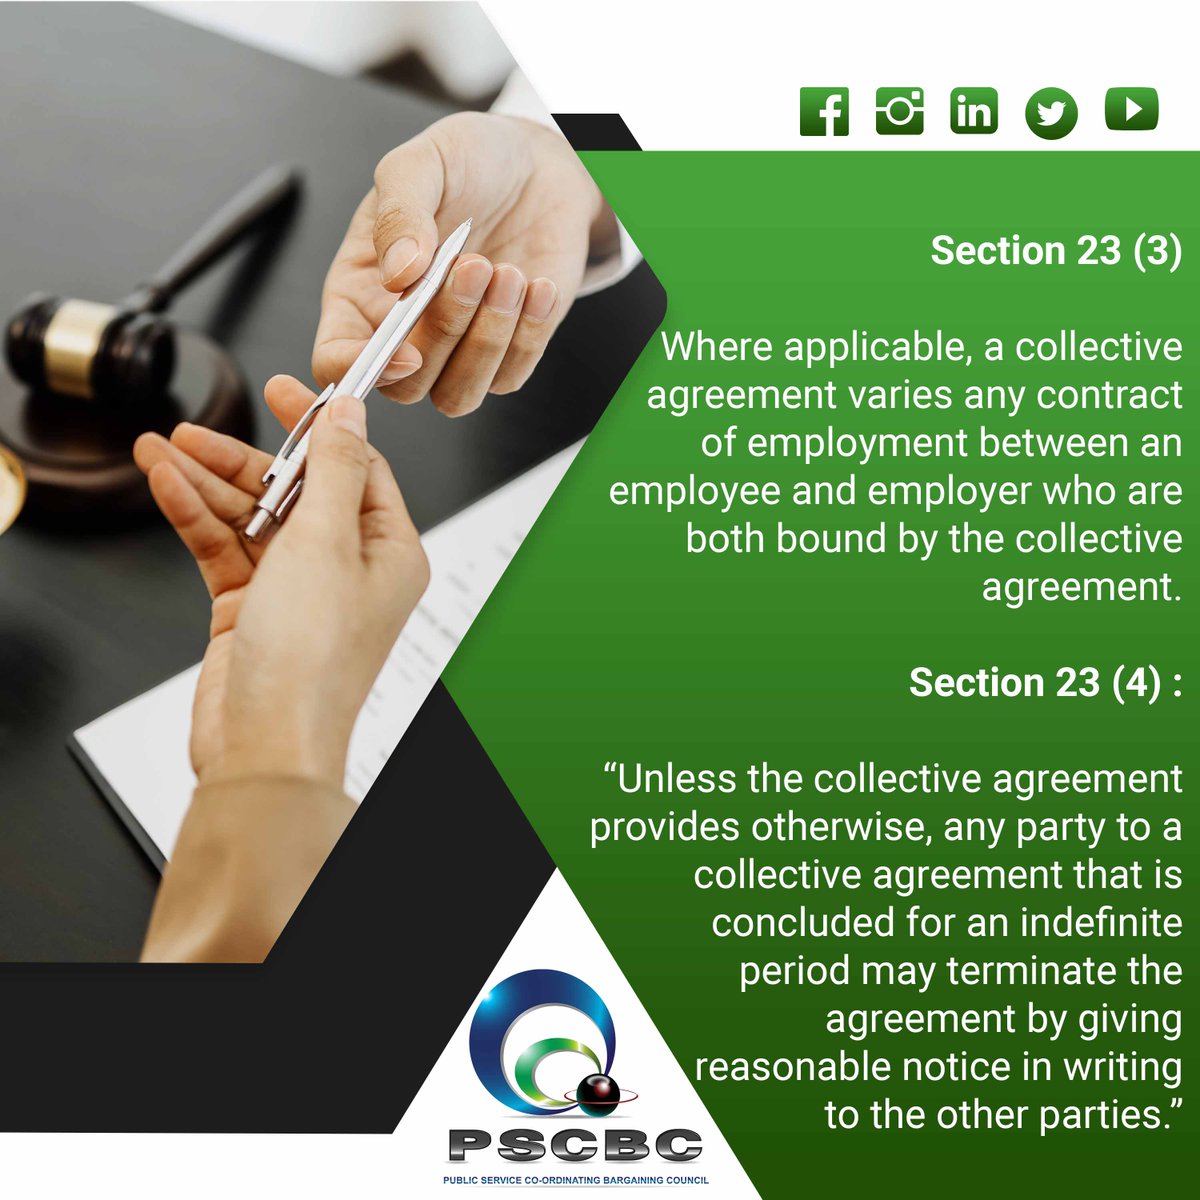 Legal effect of collective agreement in accordance with Section 23 of the LRA 66 of 1995.  #LRA #collectivebargaining #agreements